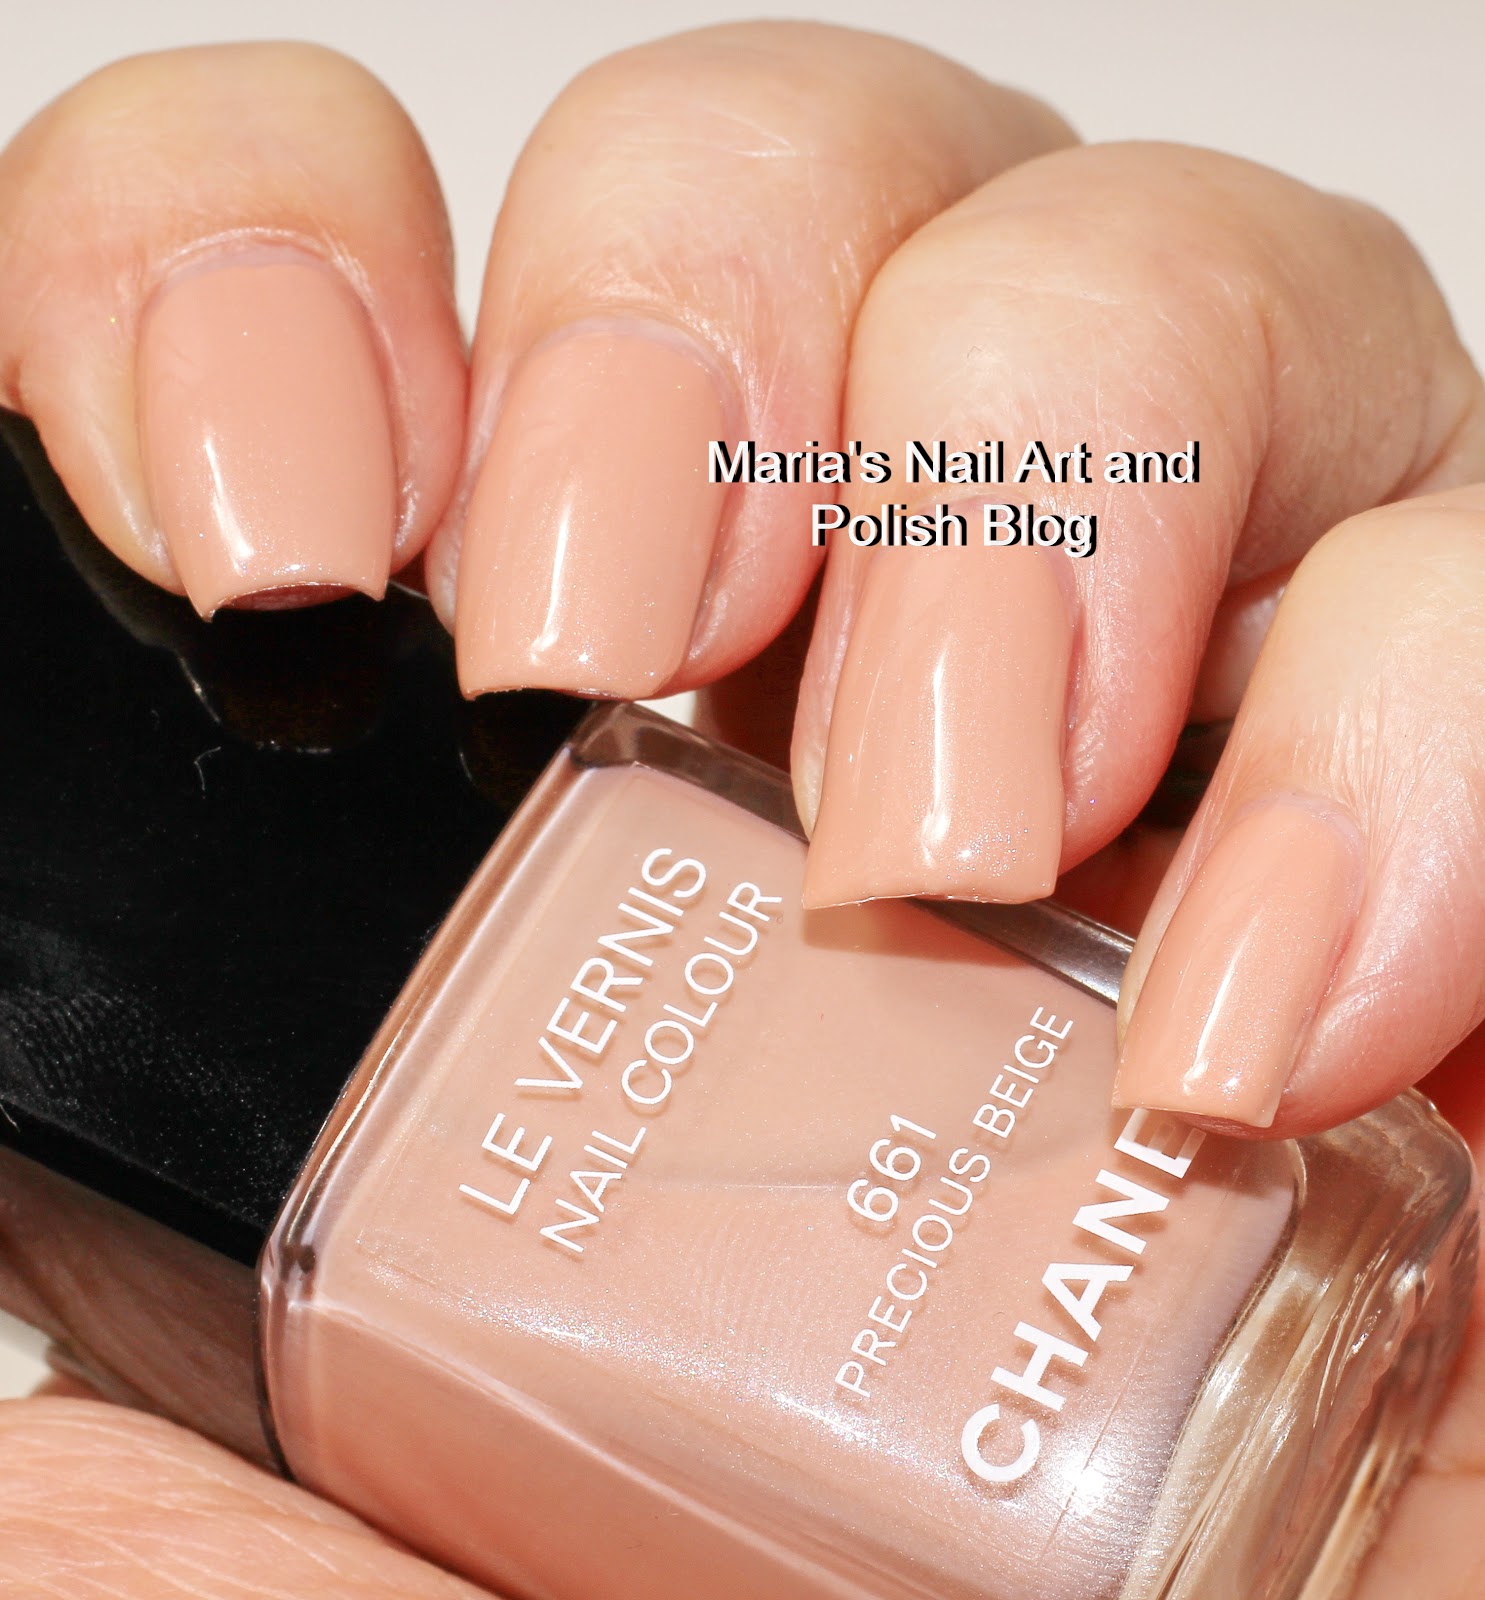 Chanel Beige Pur 659, Precious Beige 661 and Lovely Beige 663